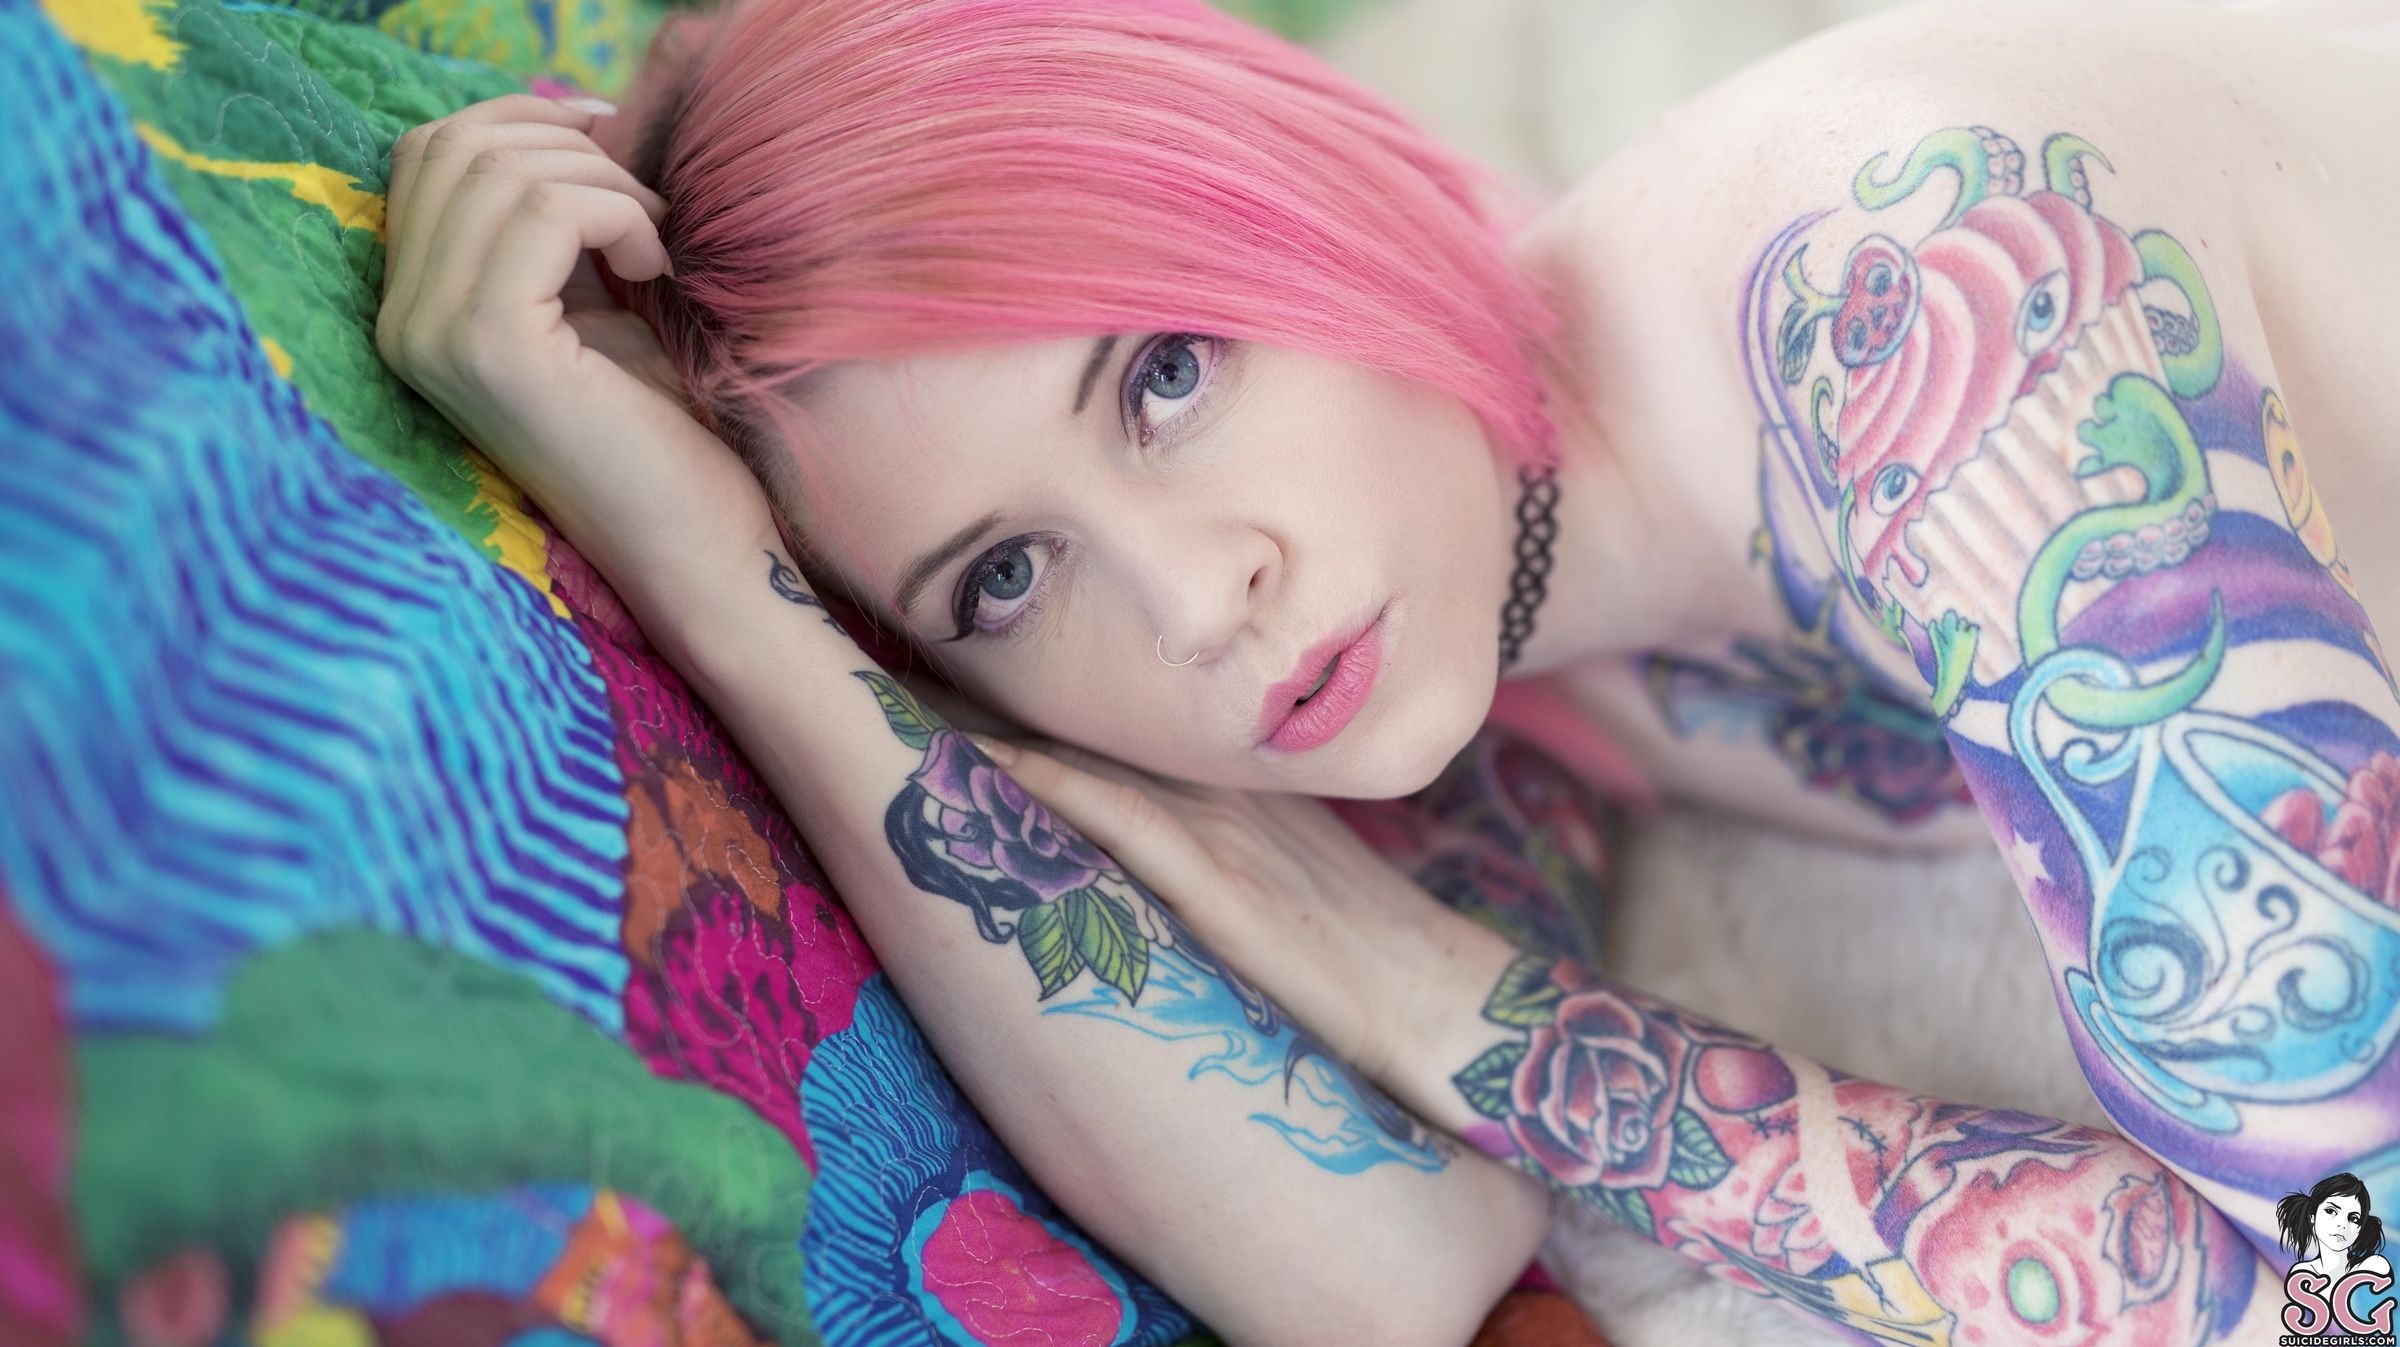 Beautiful Suicide Girl Elixia Sweet Disposition (38) High resolution lossle...